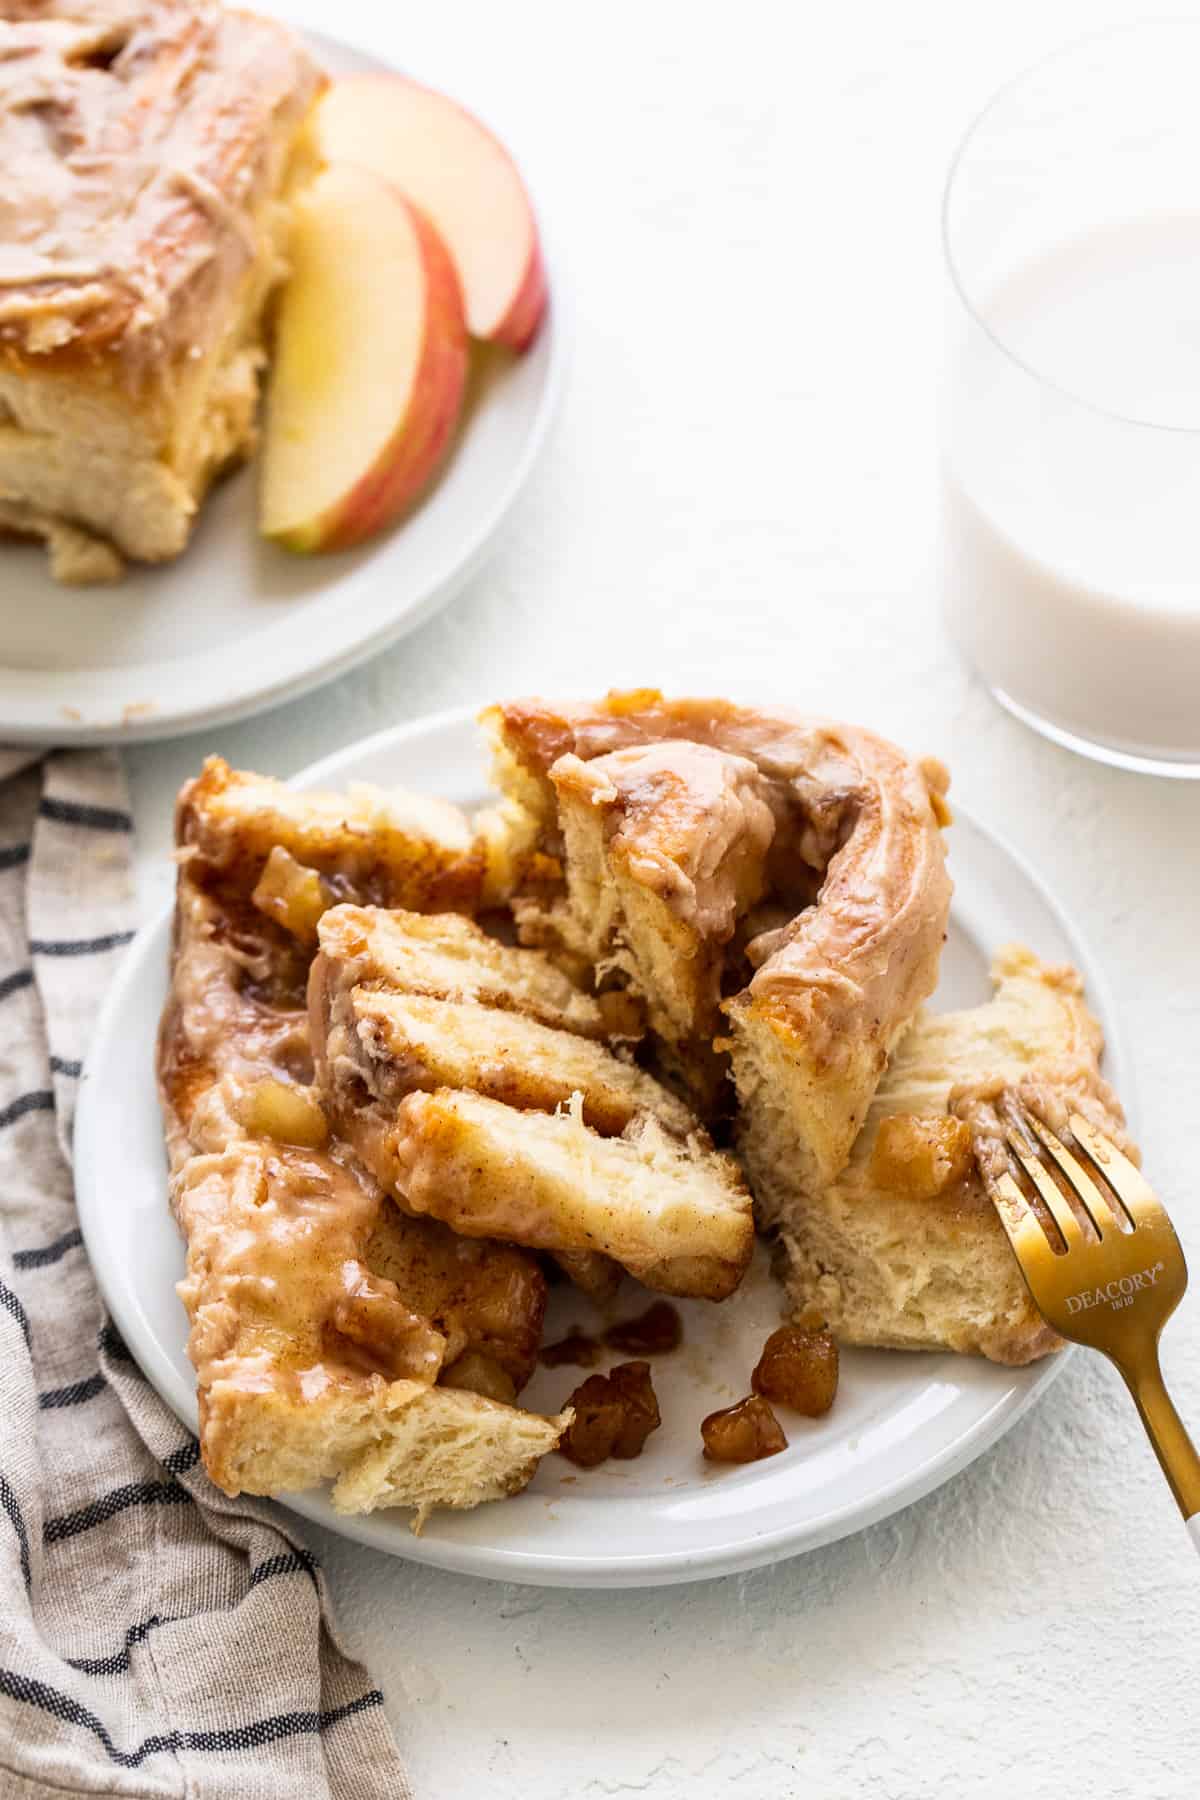 Apple cinnamon roll on a plate with a fork.